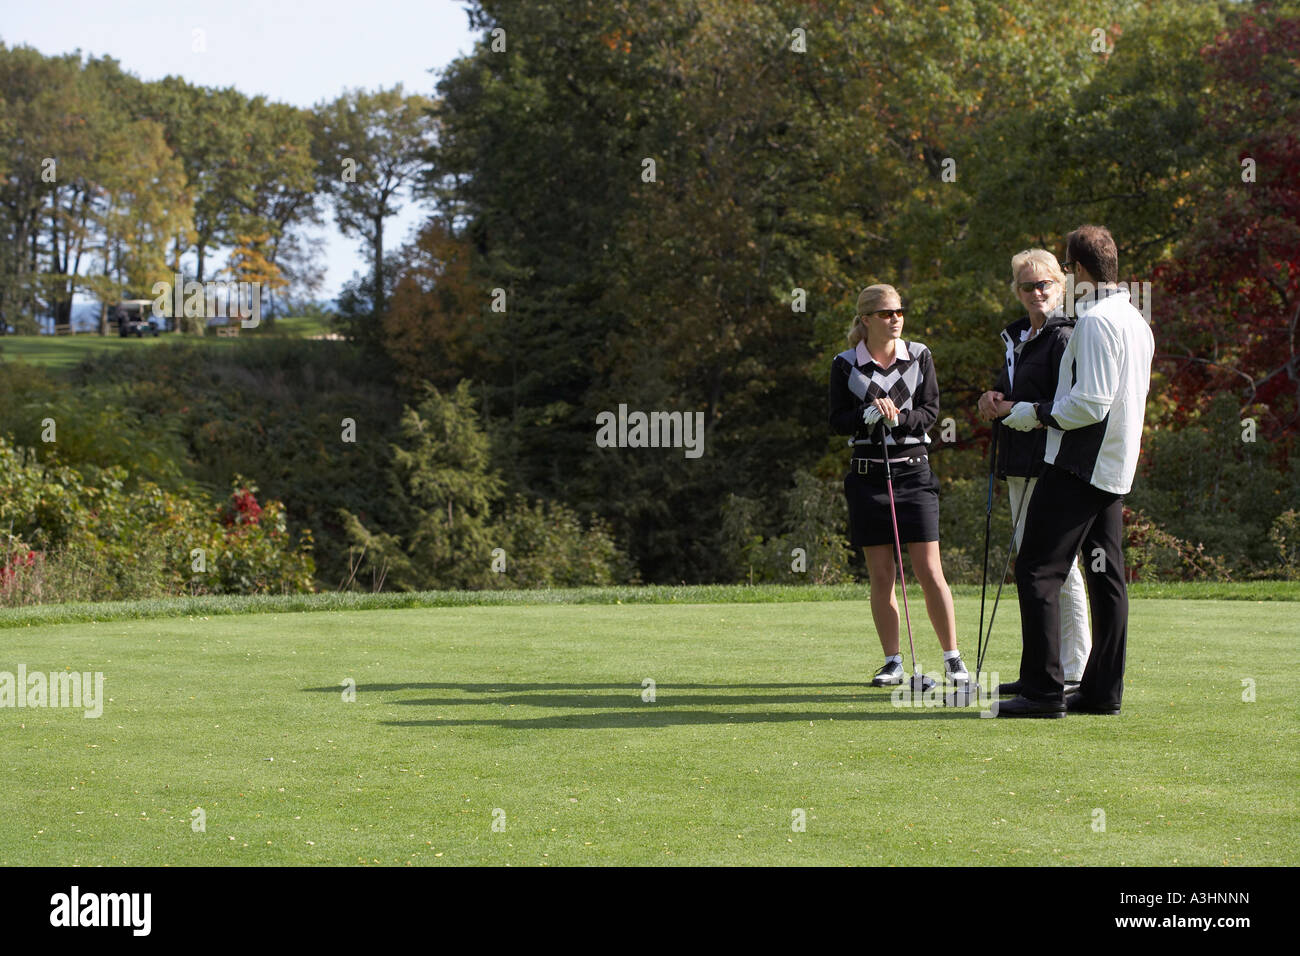 People Standing on Golf Course Stock Photo